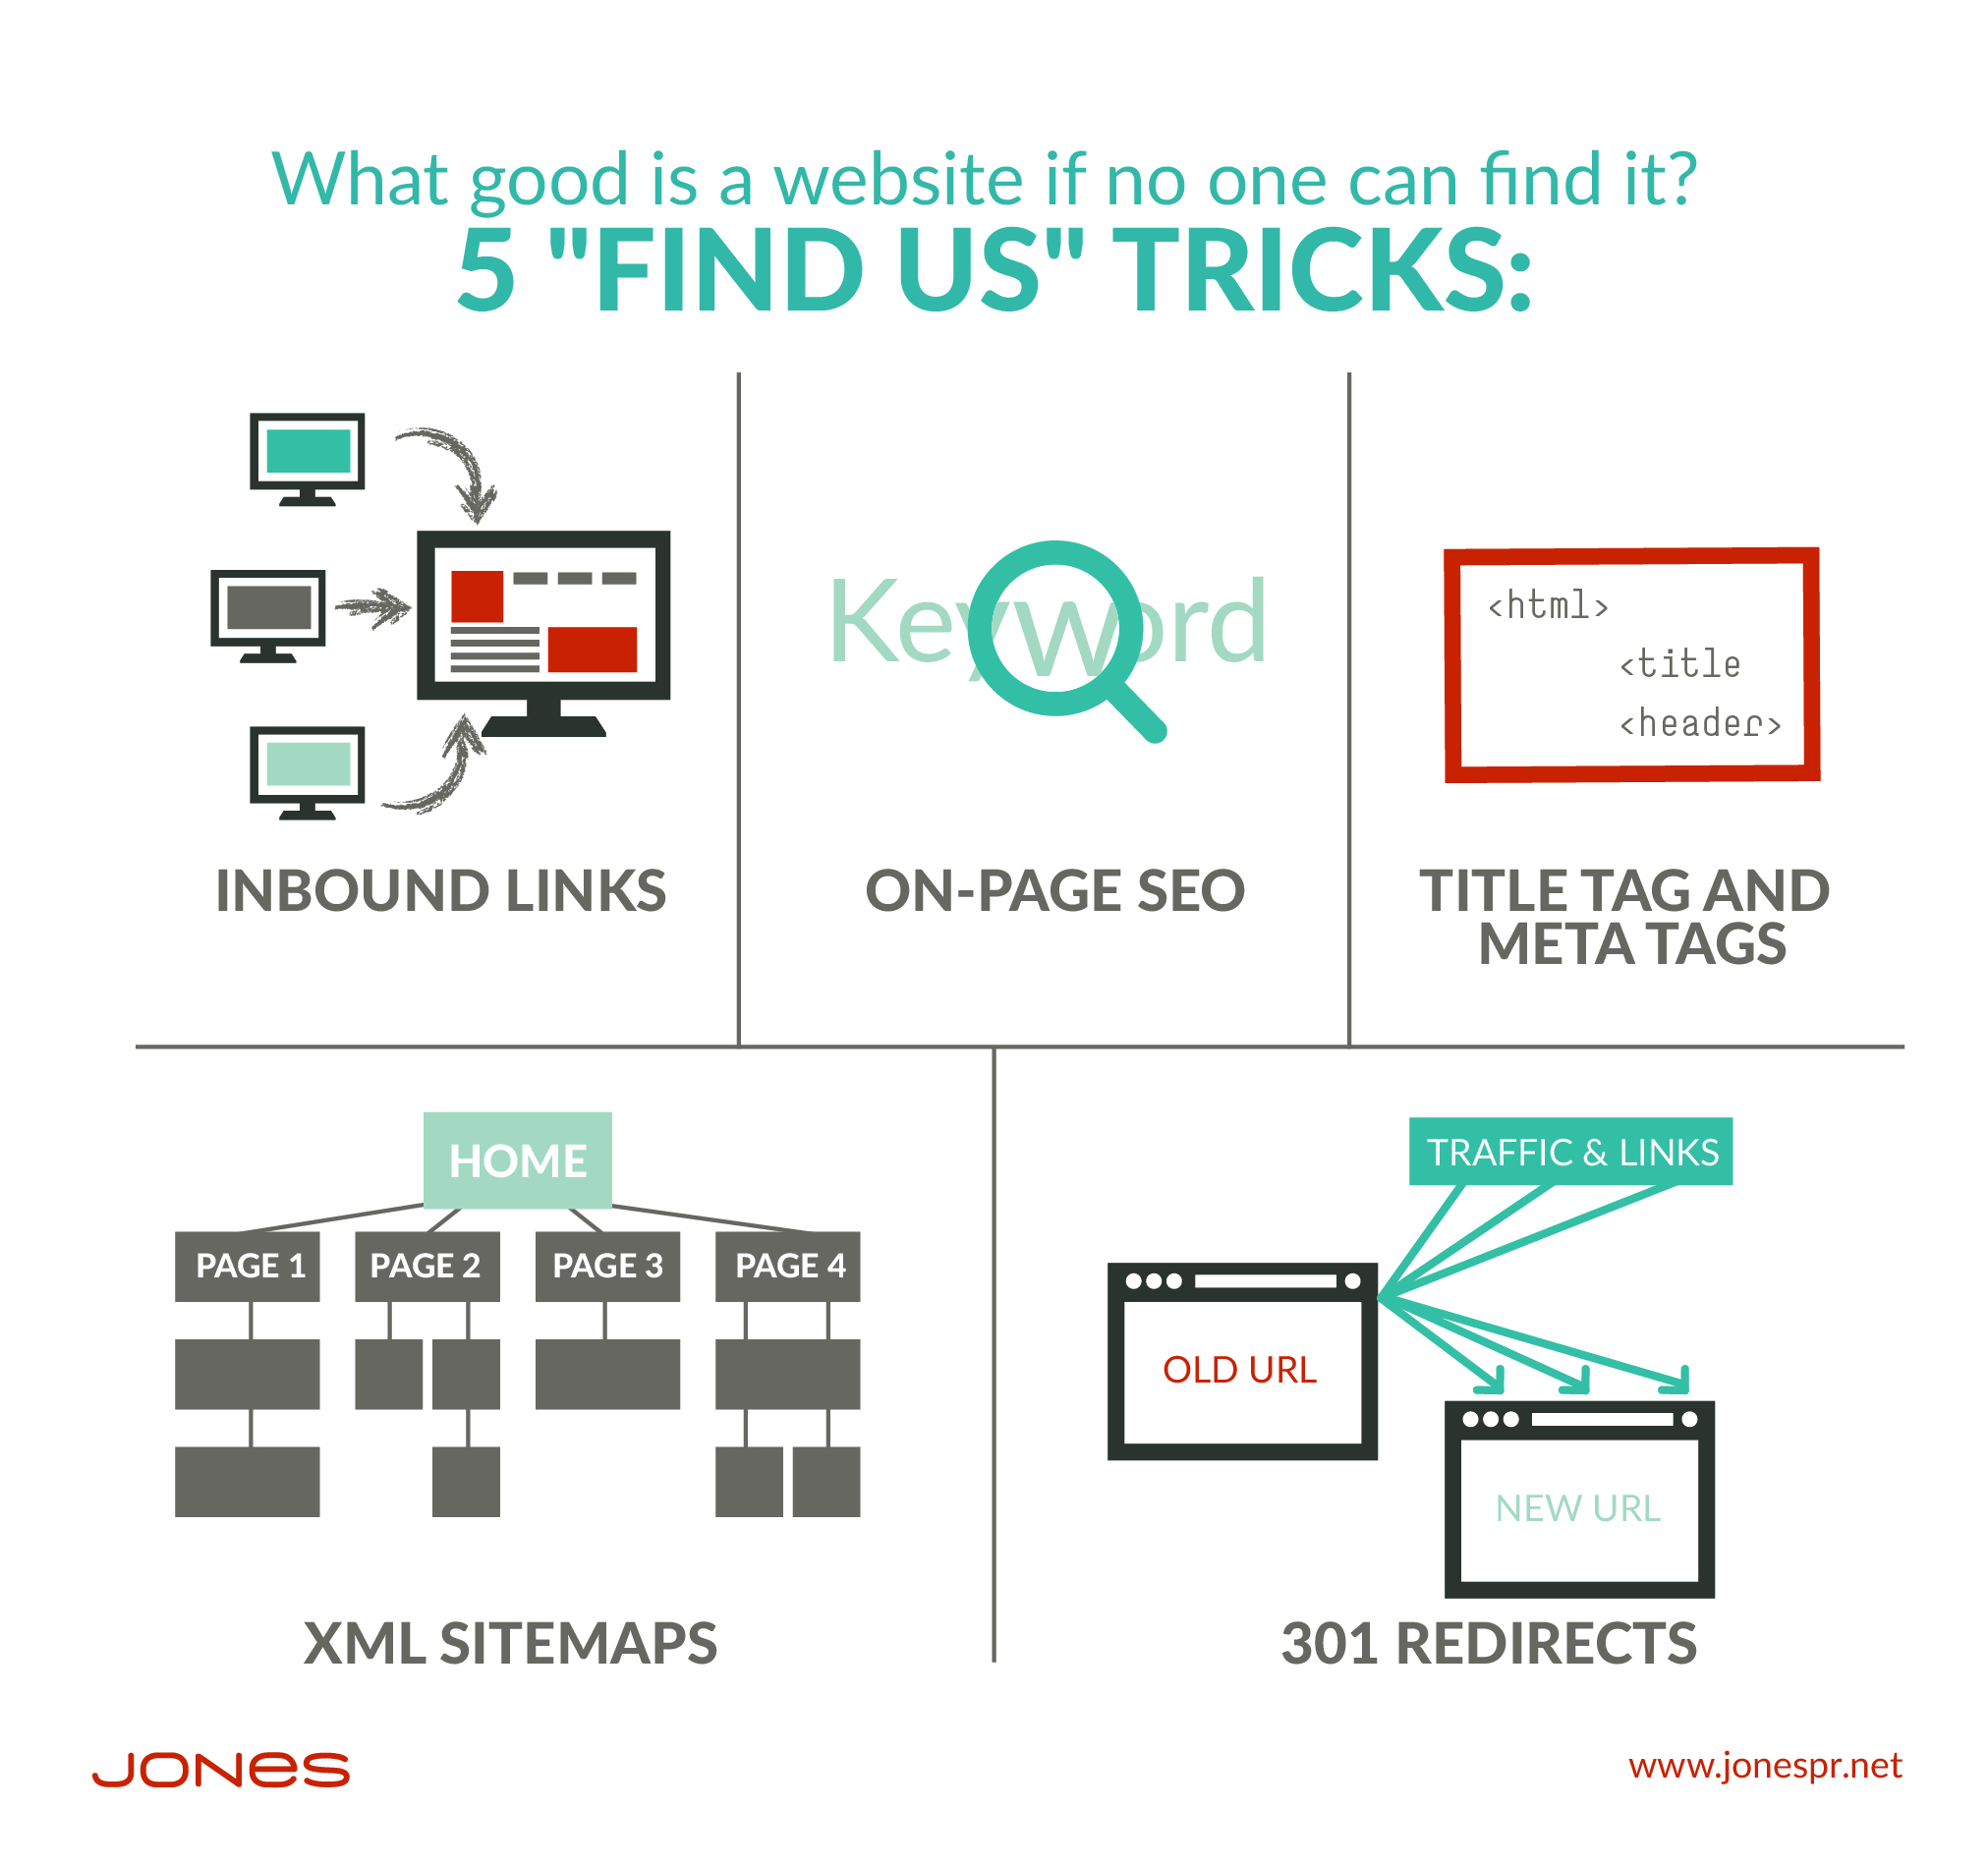 5 Ways to Make Sure Your Website Can Be Found